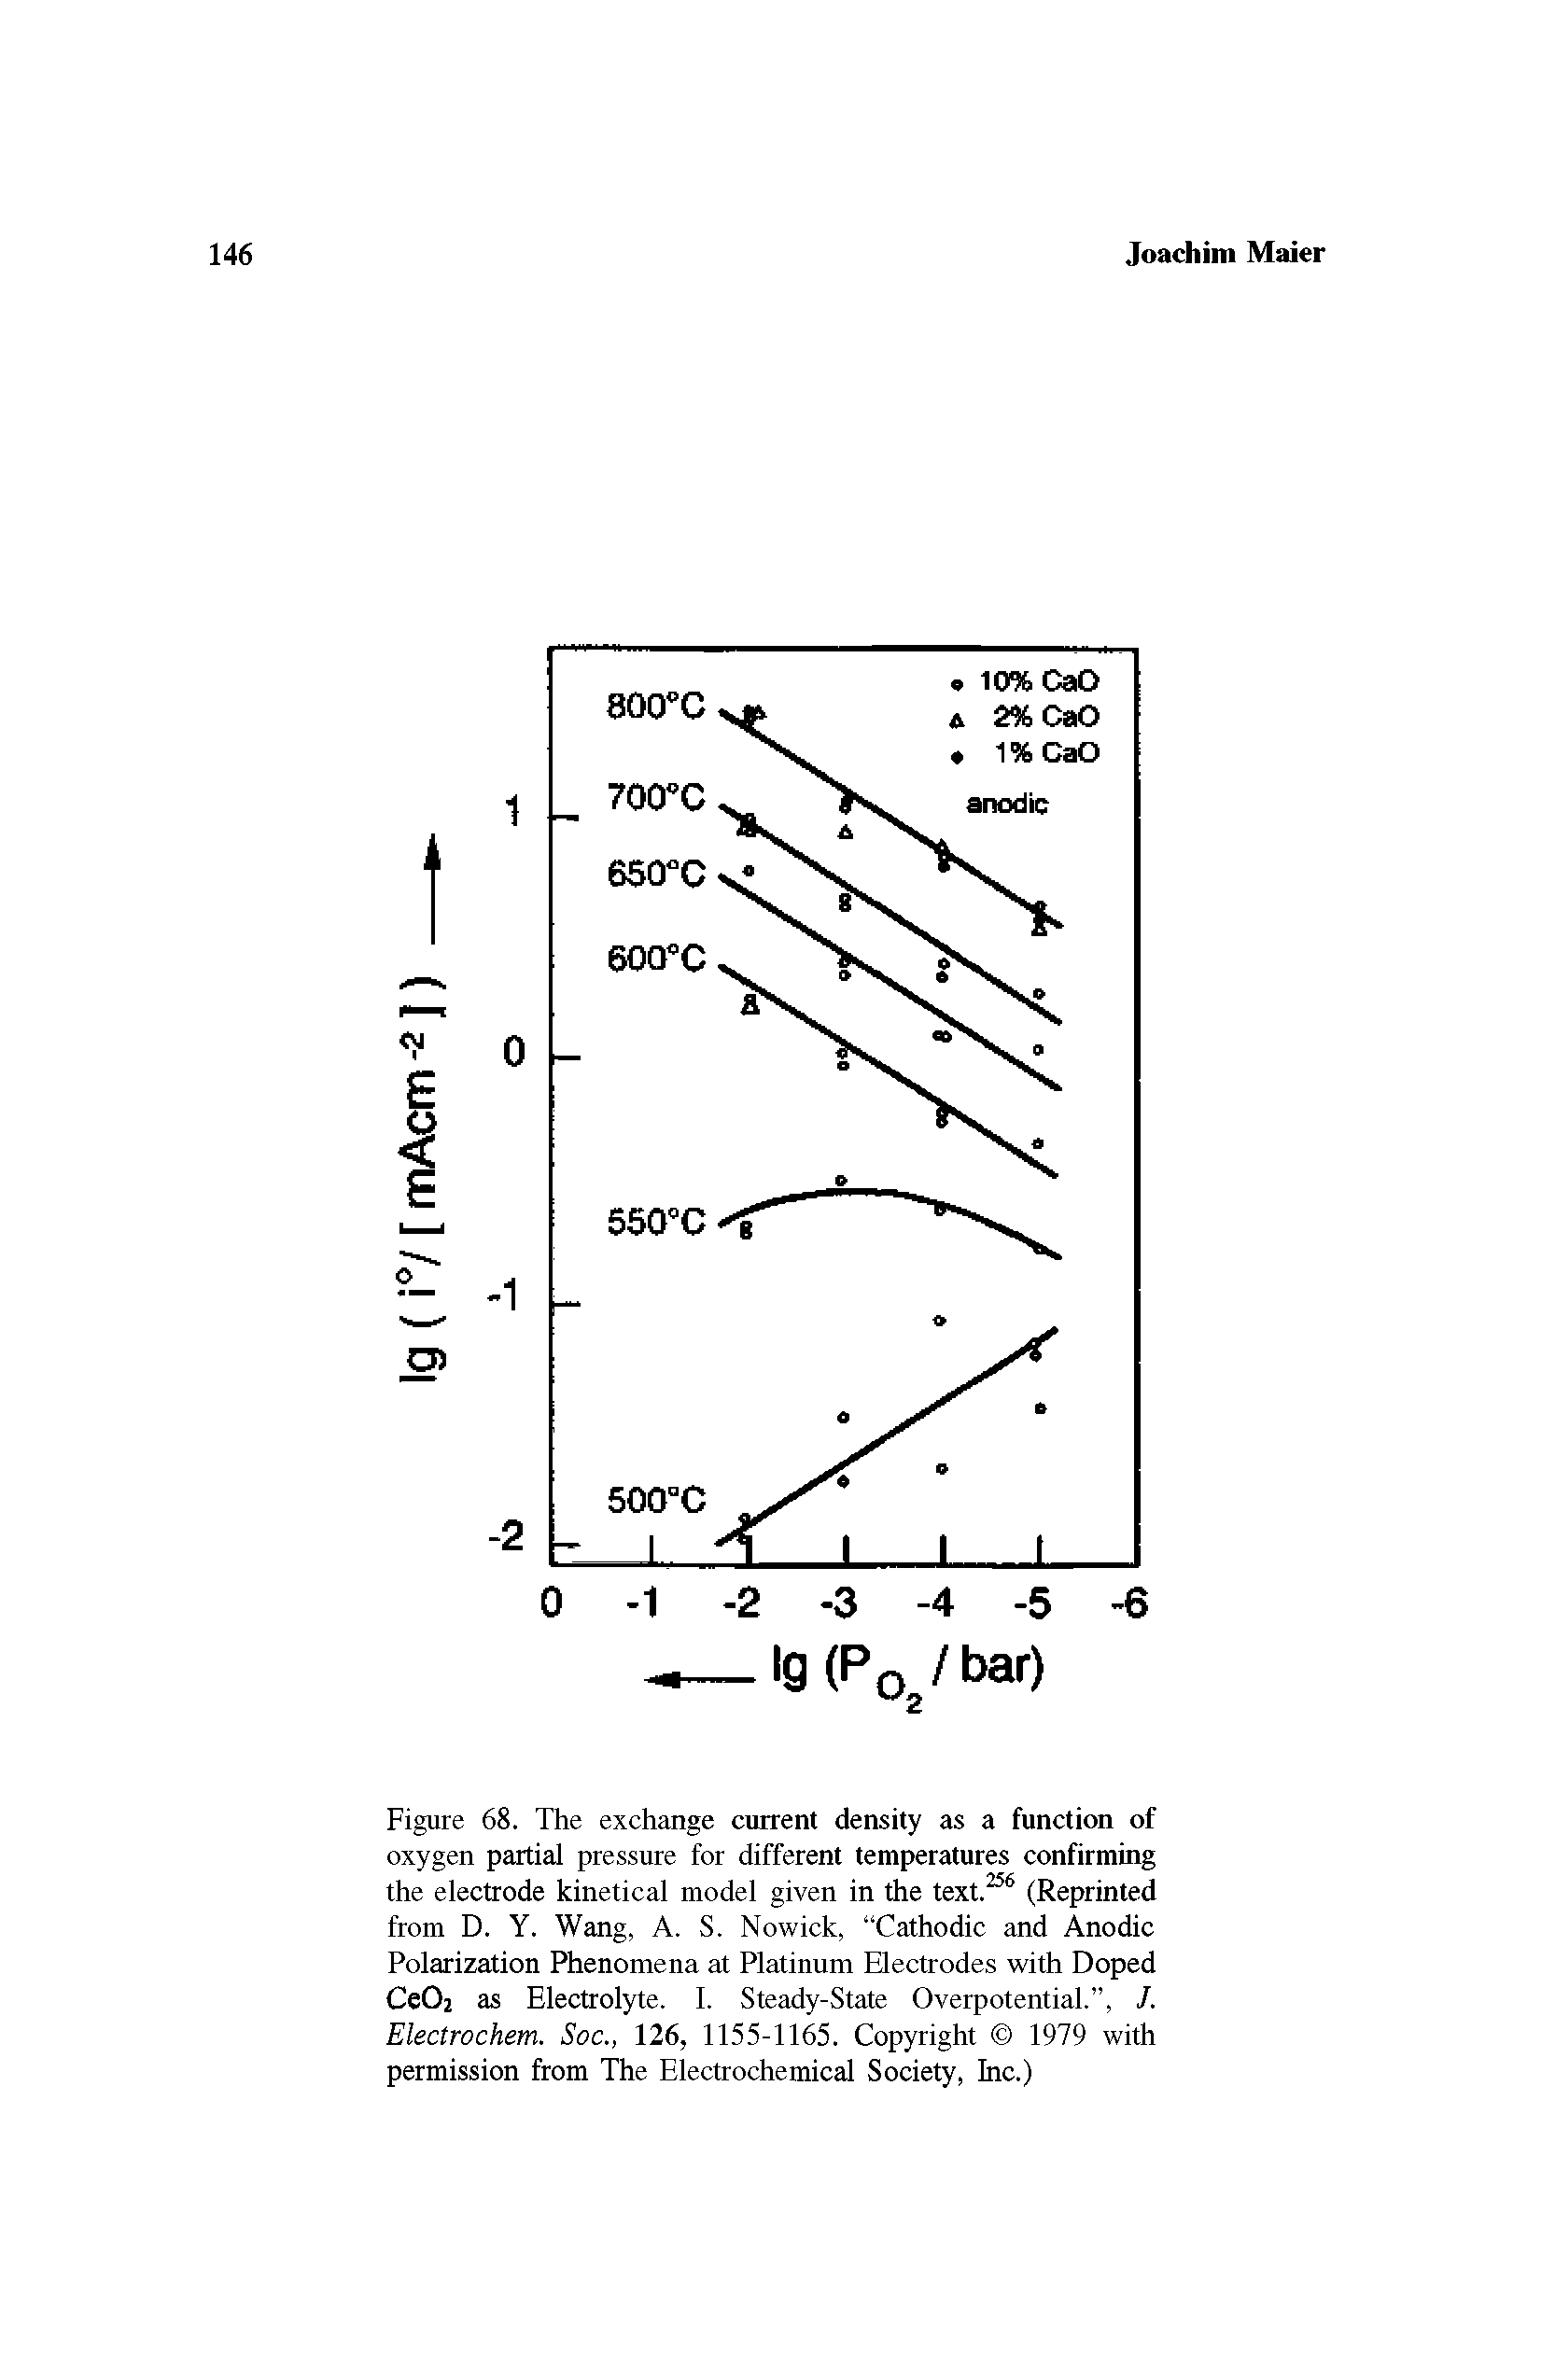 Figure 68. The exchange current density as a function of oxygen partial pressure for different temperatures confirming the electrode kinetical model given in the text.256 (Reprinted from D. Y. Wang, A. S. Nowick, Cathodic and Anodic Polarization Phenomena at Platinum Electrodes with Doped CeC>2 as Electrolyte. I. Steady-State Overpotential. , J. Electrochem. Soc., 126, 1155-1165. Copyright 1979 with permission from The Electrochemical Society, Inc.)...